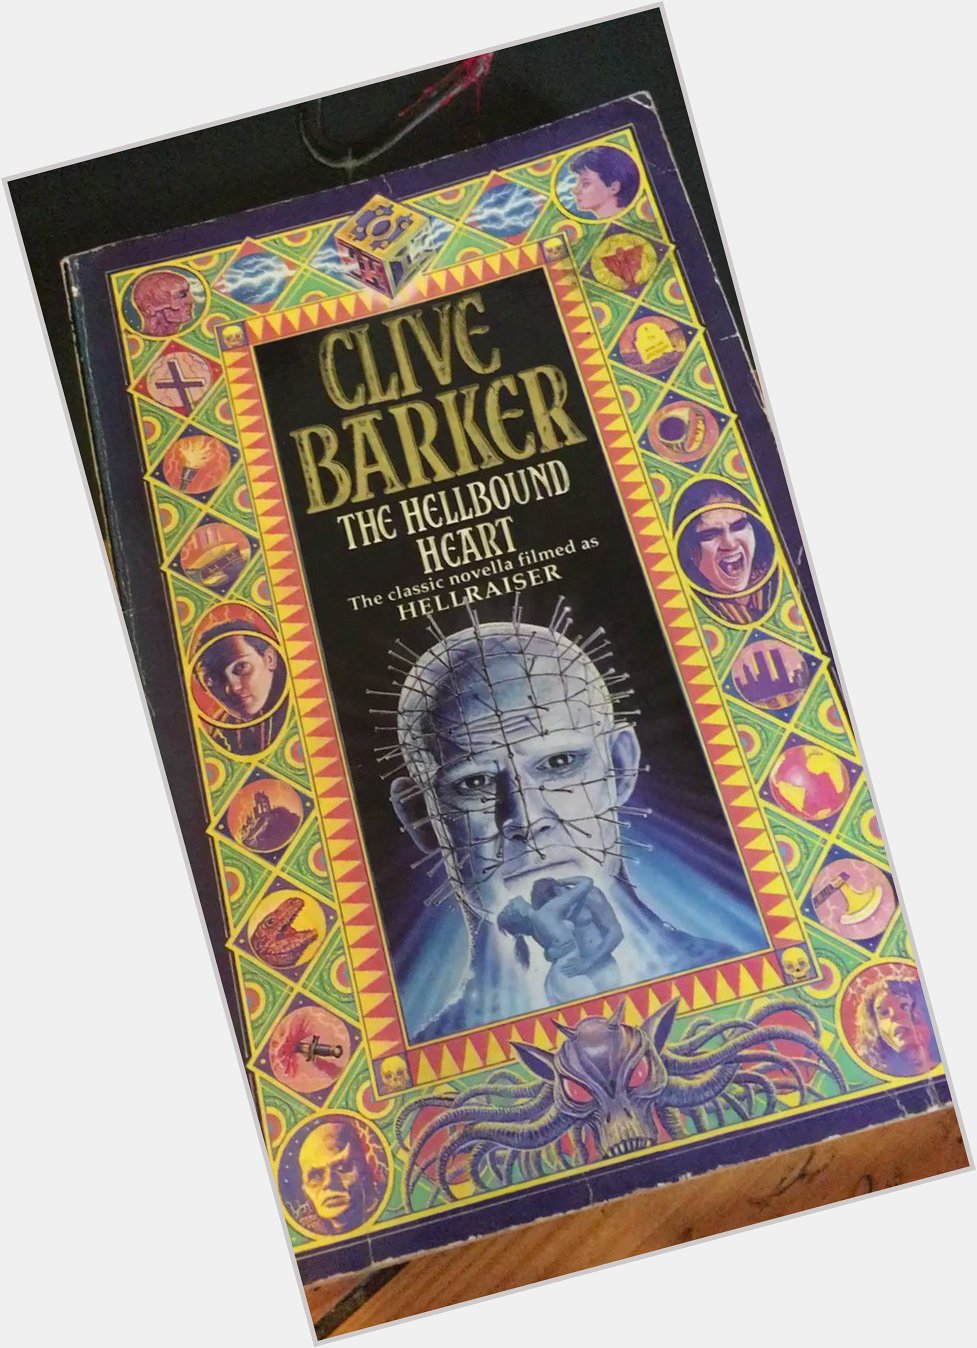 Happy 35th Birthday to Clive Barker s masterpiece of horror 